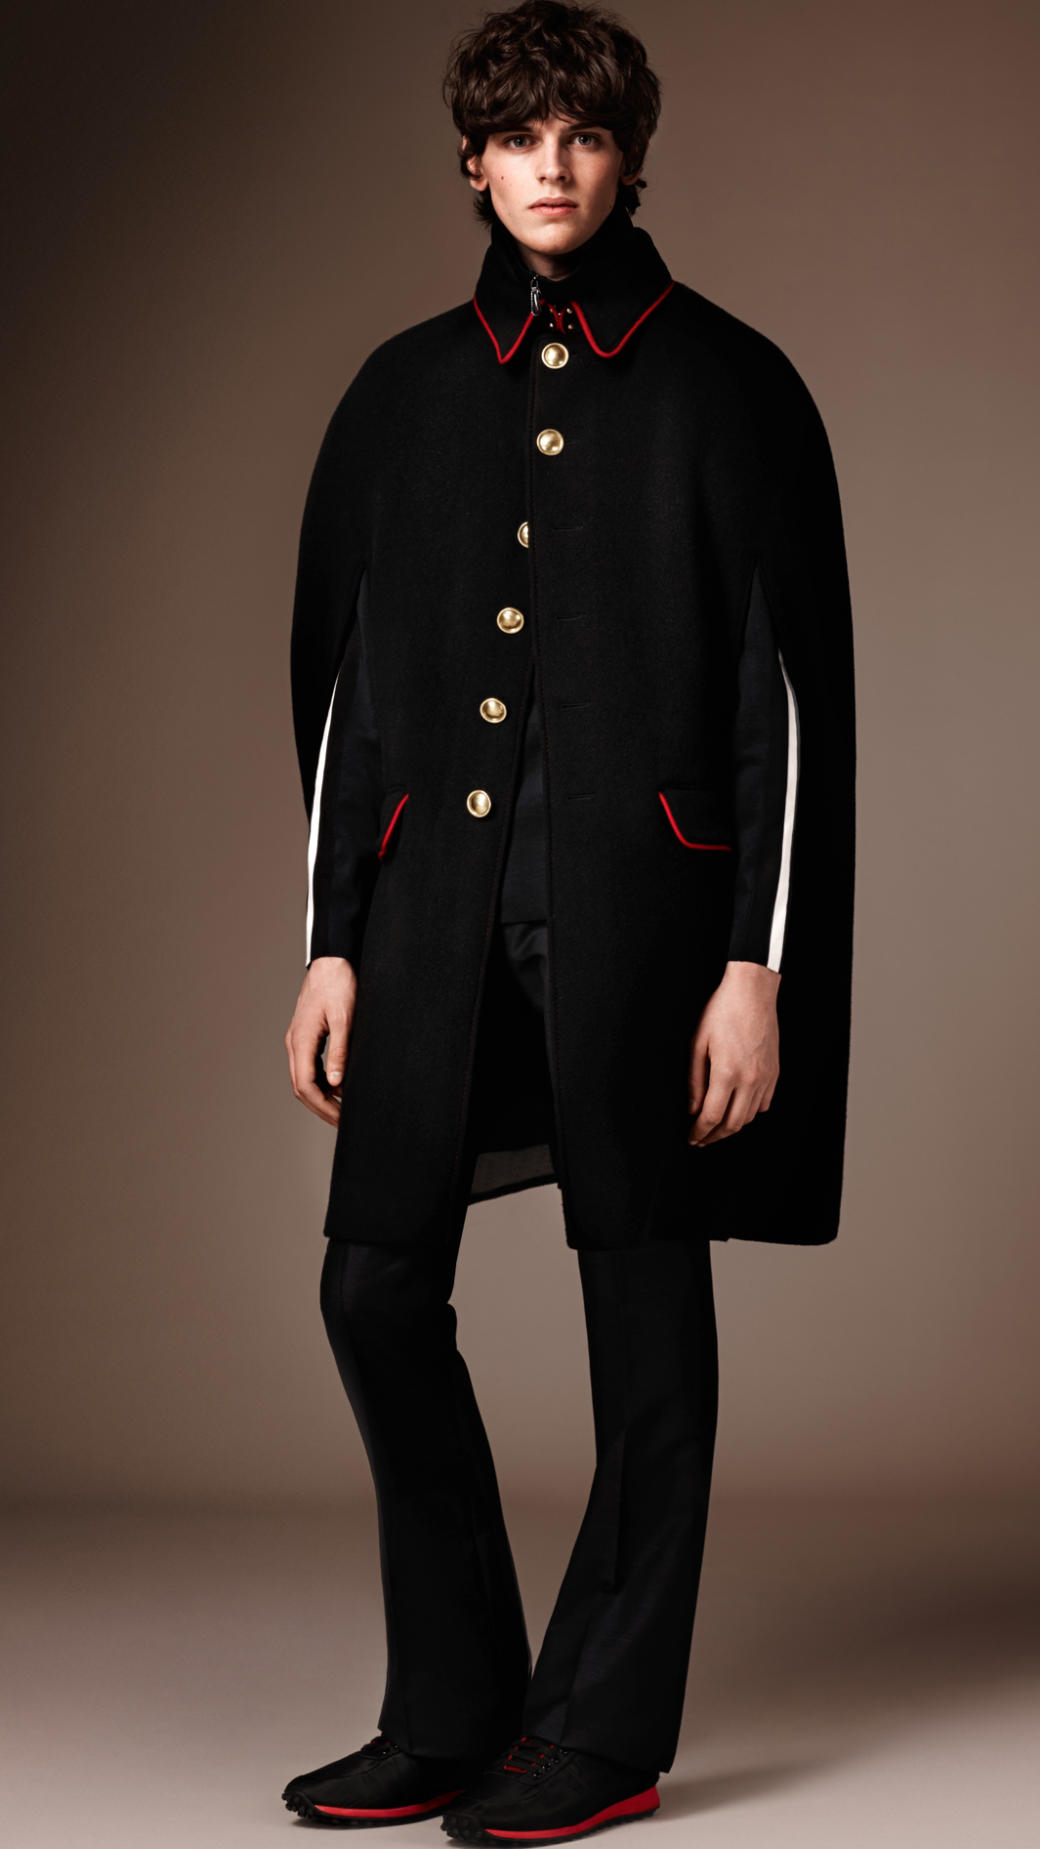 Burberry Wool Cashmere Military Cape in Black for Men - Lyst